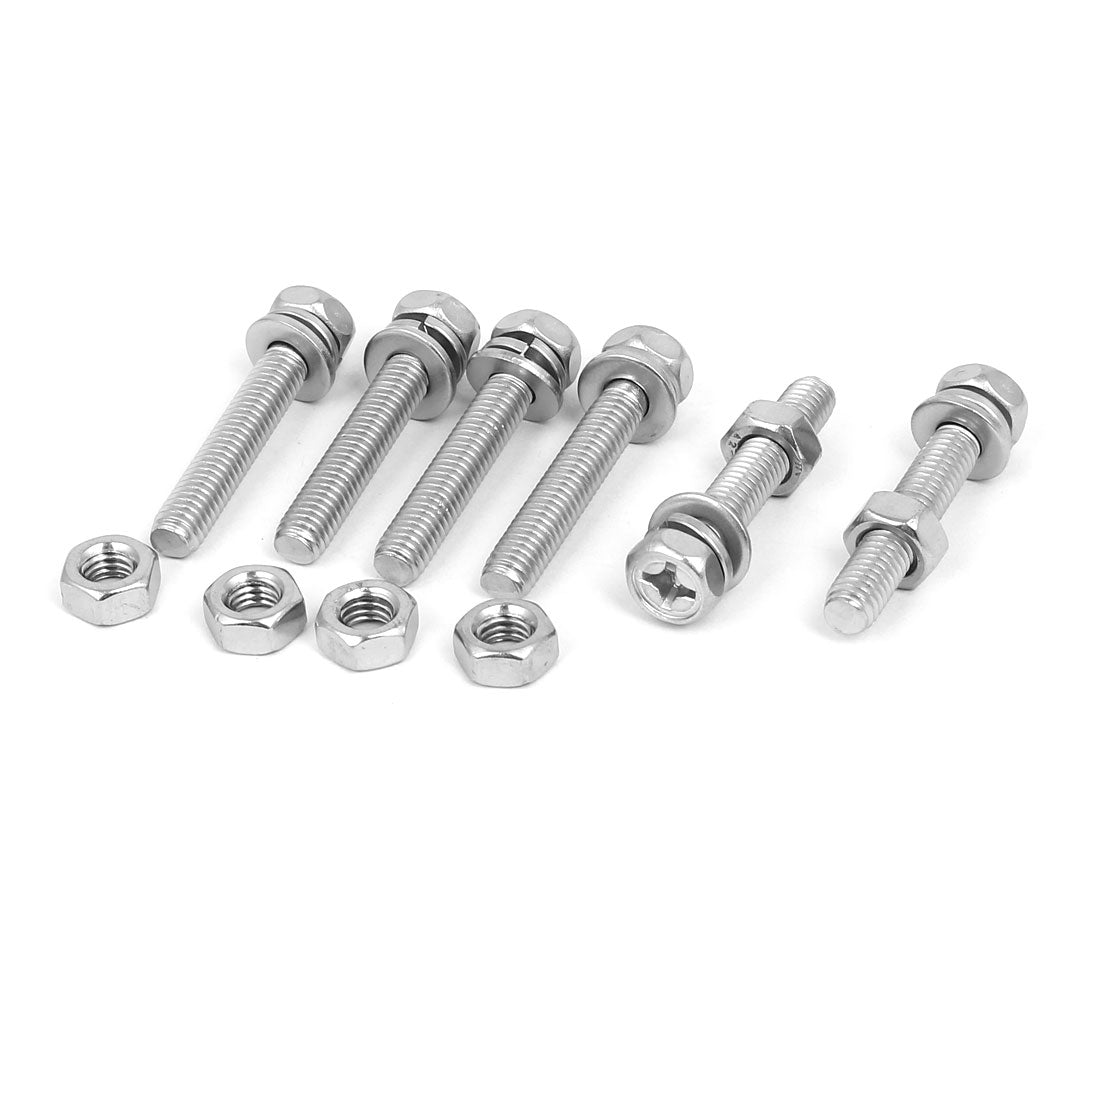 uxcell Uxcell M6 x 35mm 304 Stainless Steel Phillips Hex Head Bolts Nuts w Washers 6 Sets